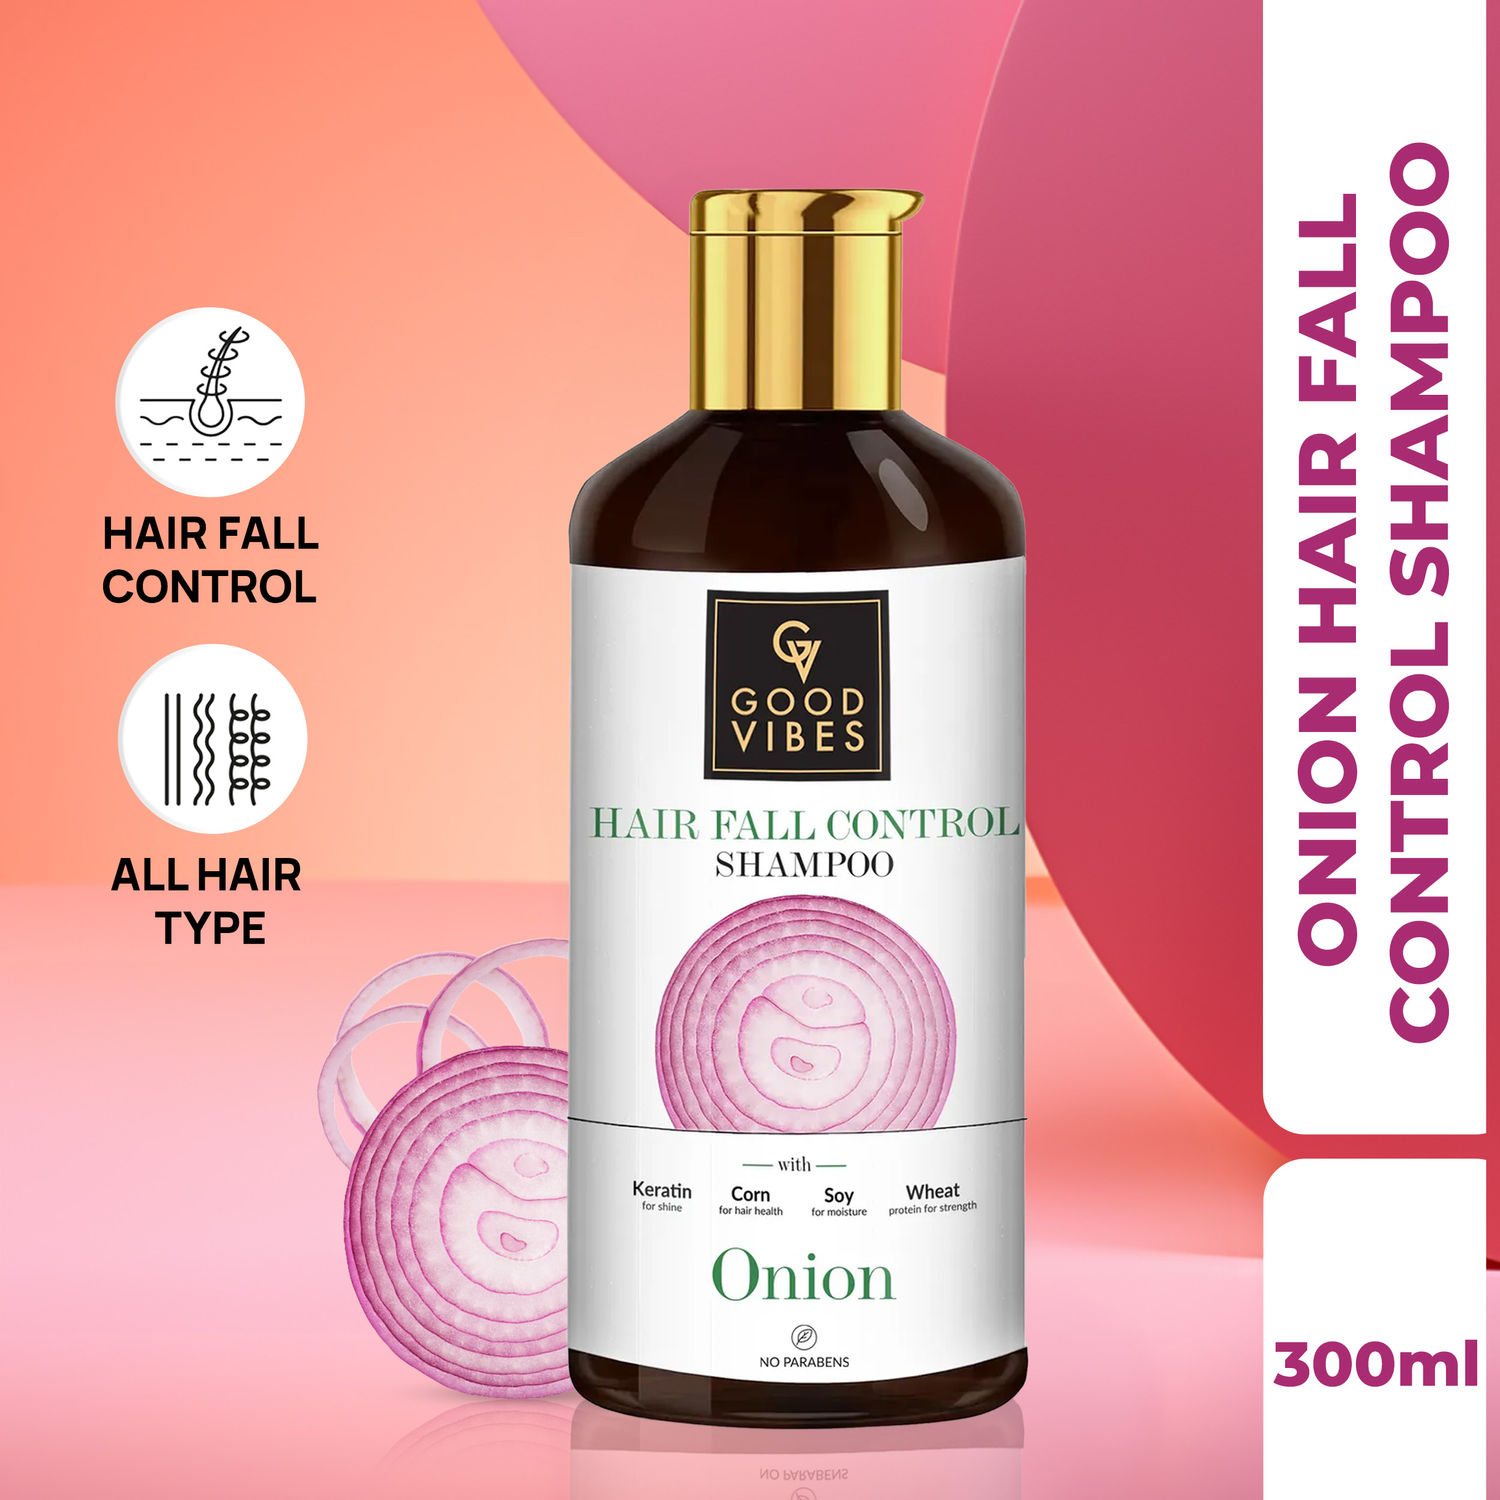 Buy Good Vibes Onion Hairfall Control Shampoo with Keratin, Corn, Wheat Protein & Soy | Strengthening | No Parabens, No Animal Testing (300 ml) - Purplle